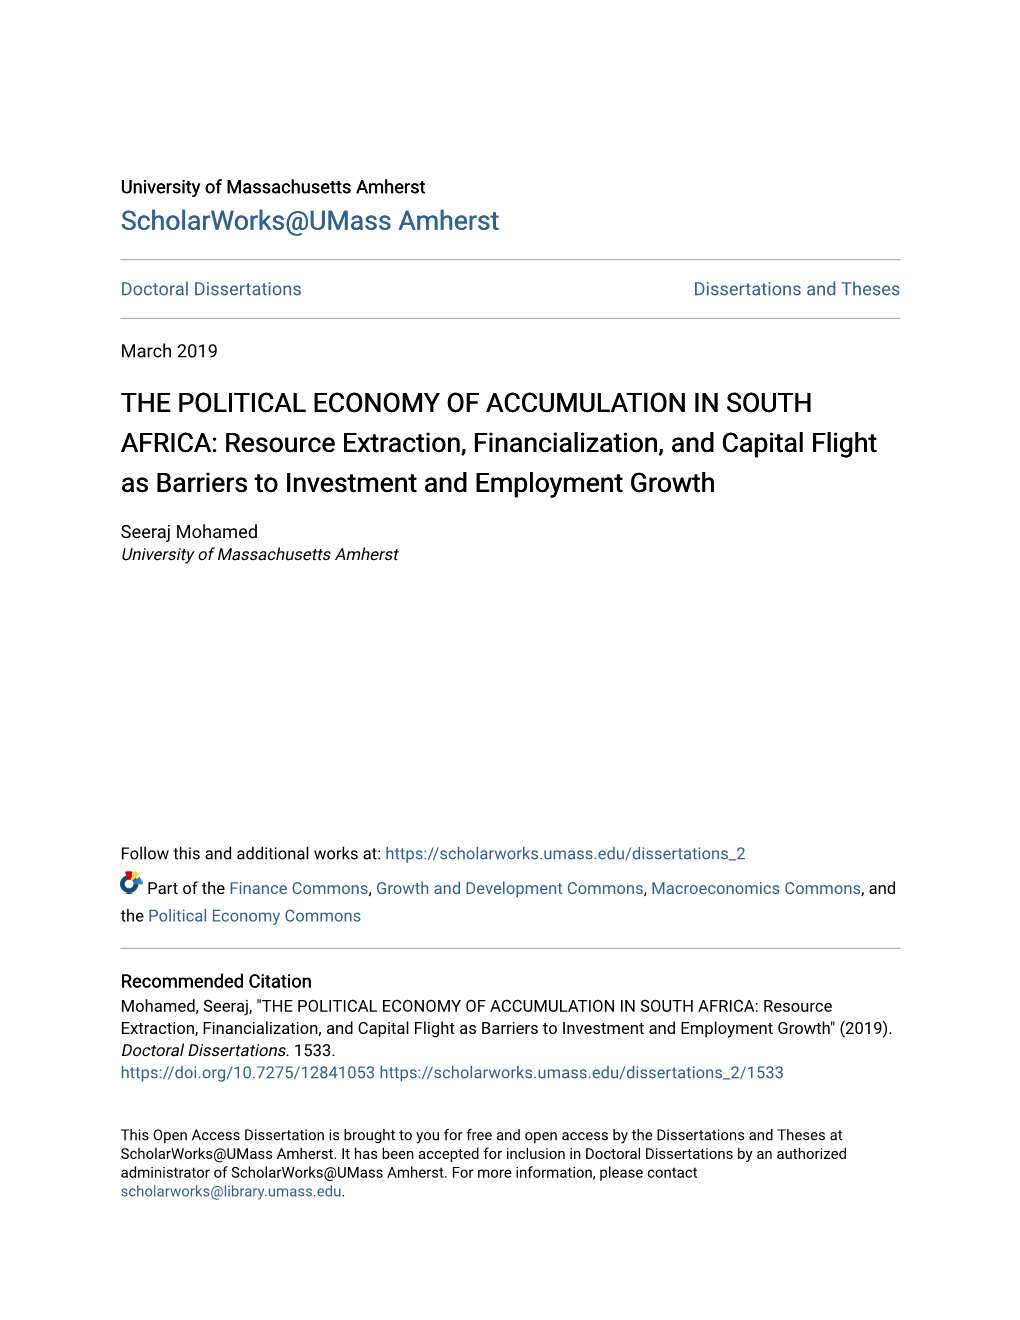 THE POLITICAL ECONOMY of ACCUMULATION in SOUTH AFRICA: Resource Extraction, Financialization, and Capital Flight As Barriers to Investment and Employment Growth